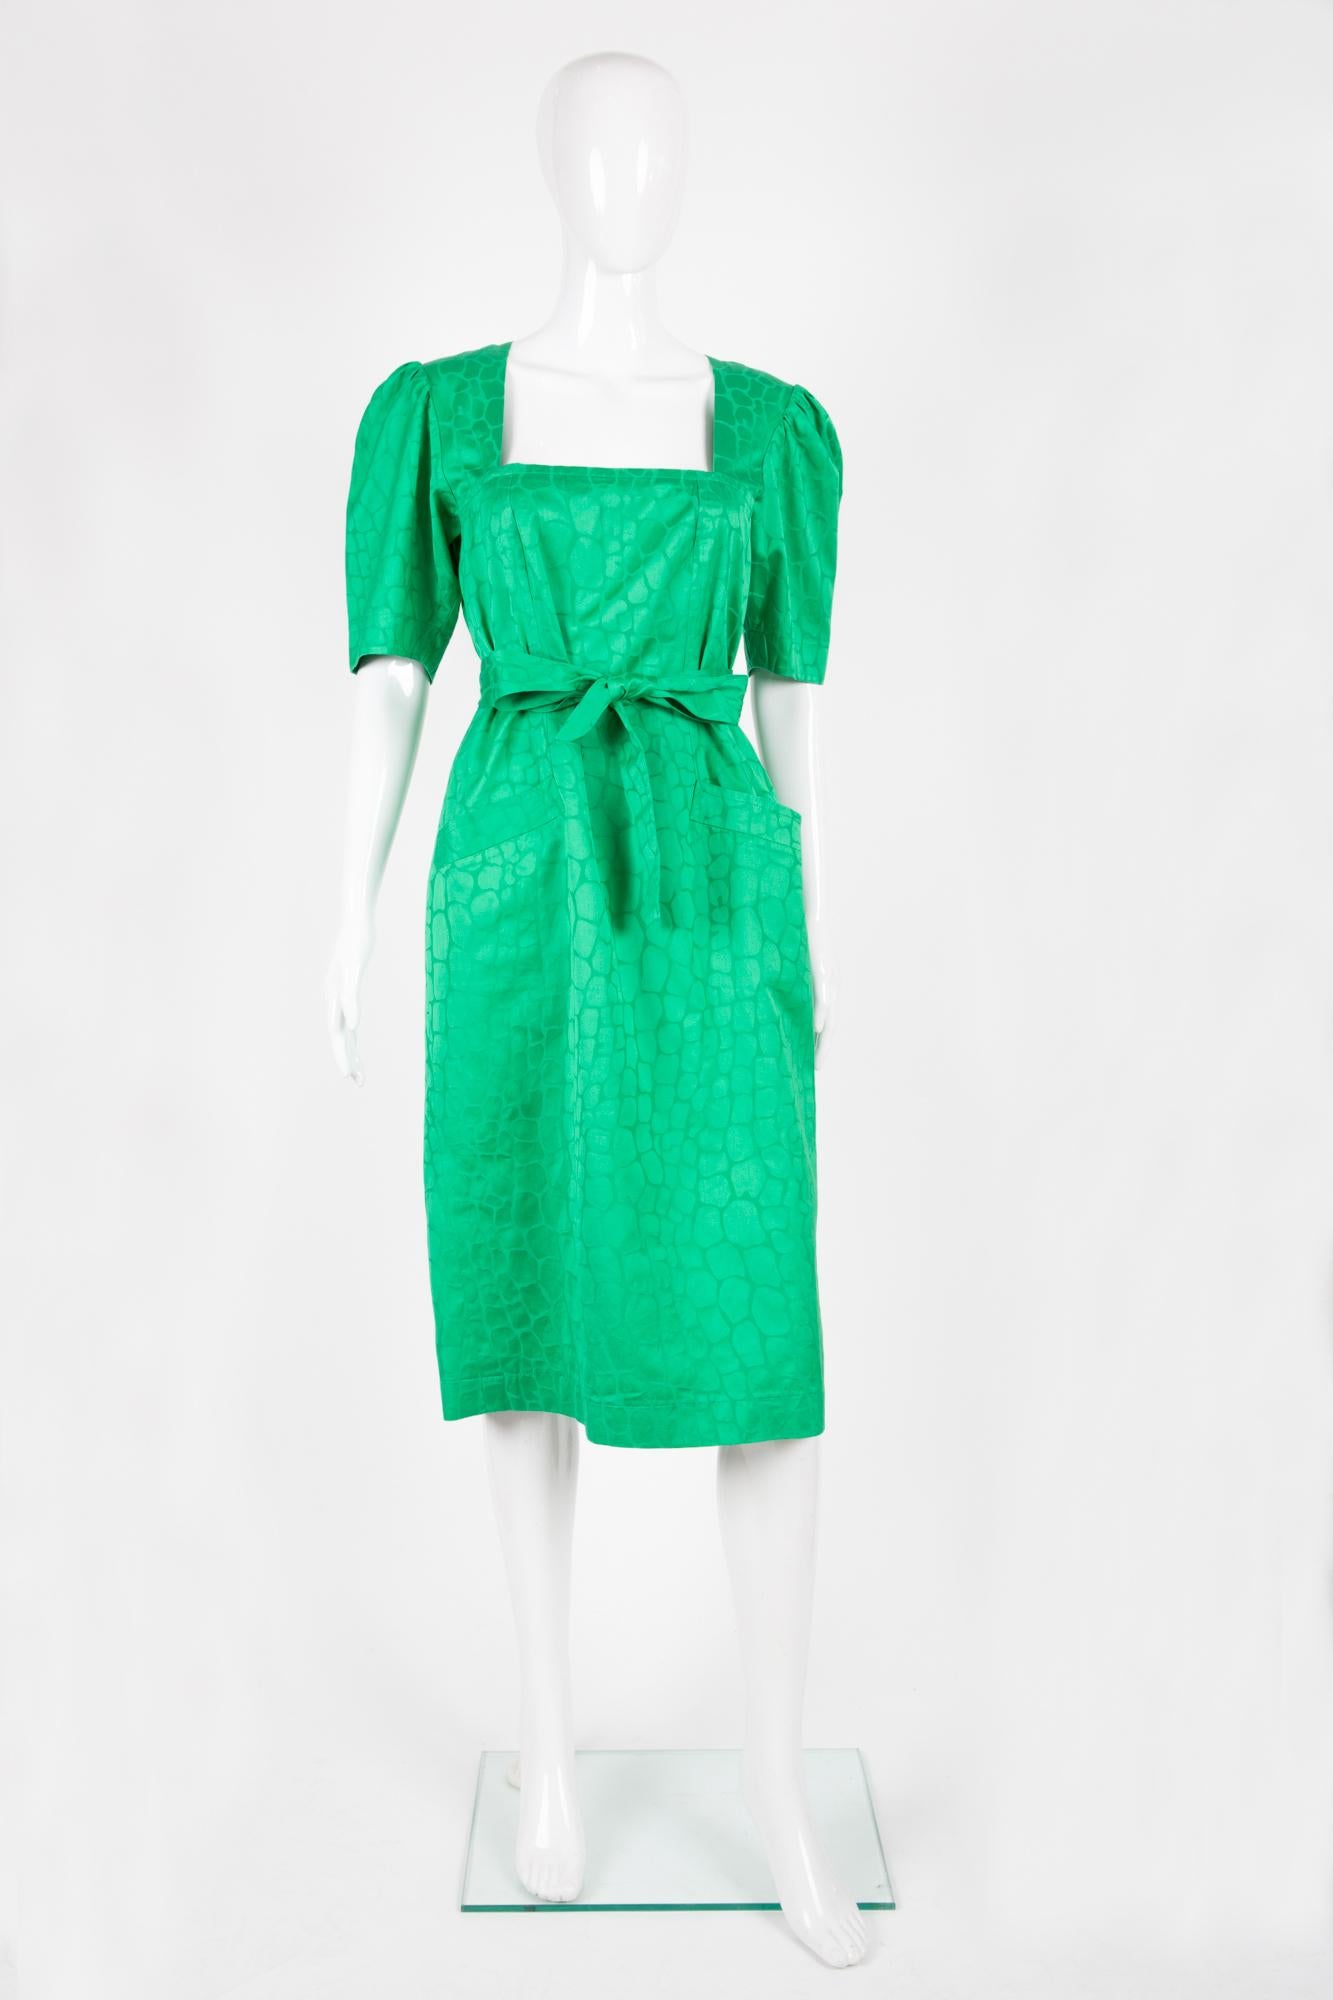 Yves Saint Laurent green dress featuring a jacquard pattern, a separated belt, back button opening, front pockets. 
100% cotton
In excellent vintage condition. Made in France. 
Label size 338fr/US6 /UK10
We guarantee you will receive this gorgeous